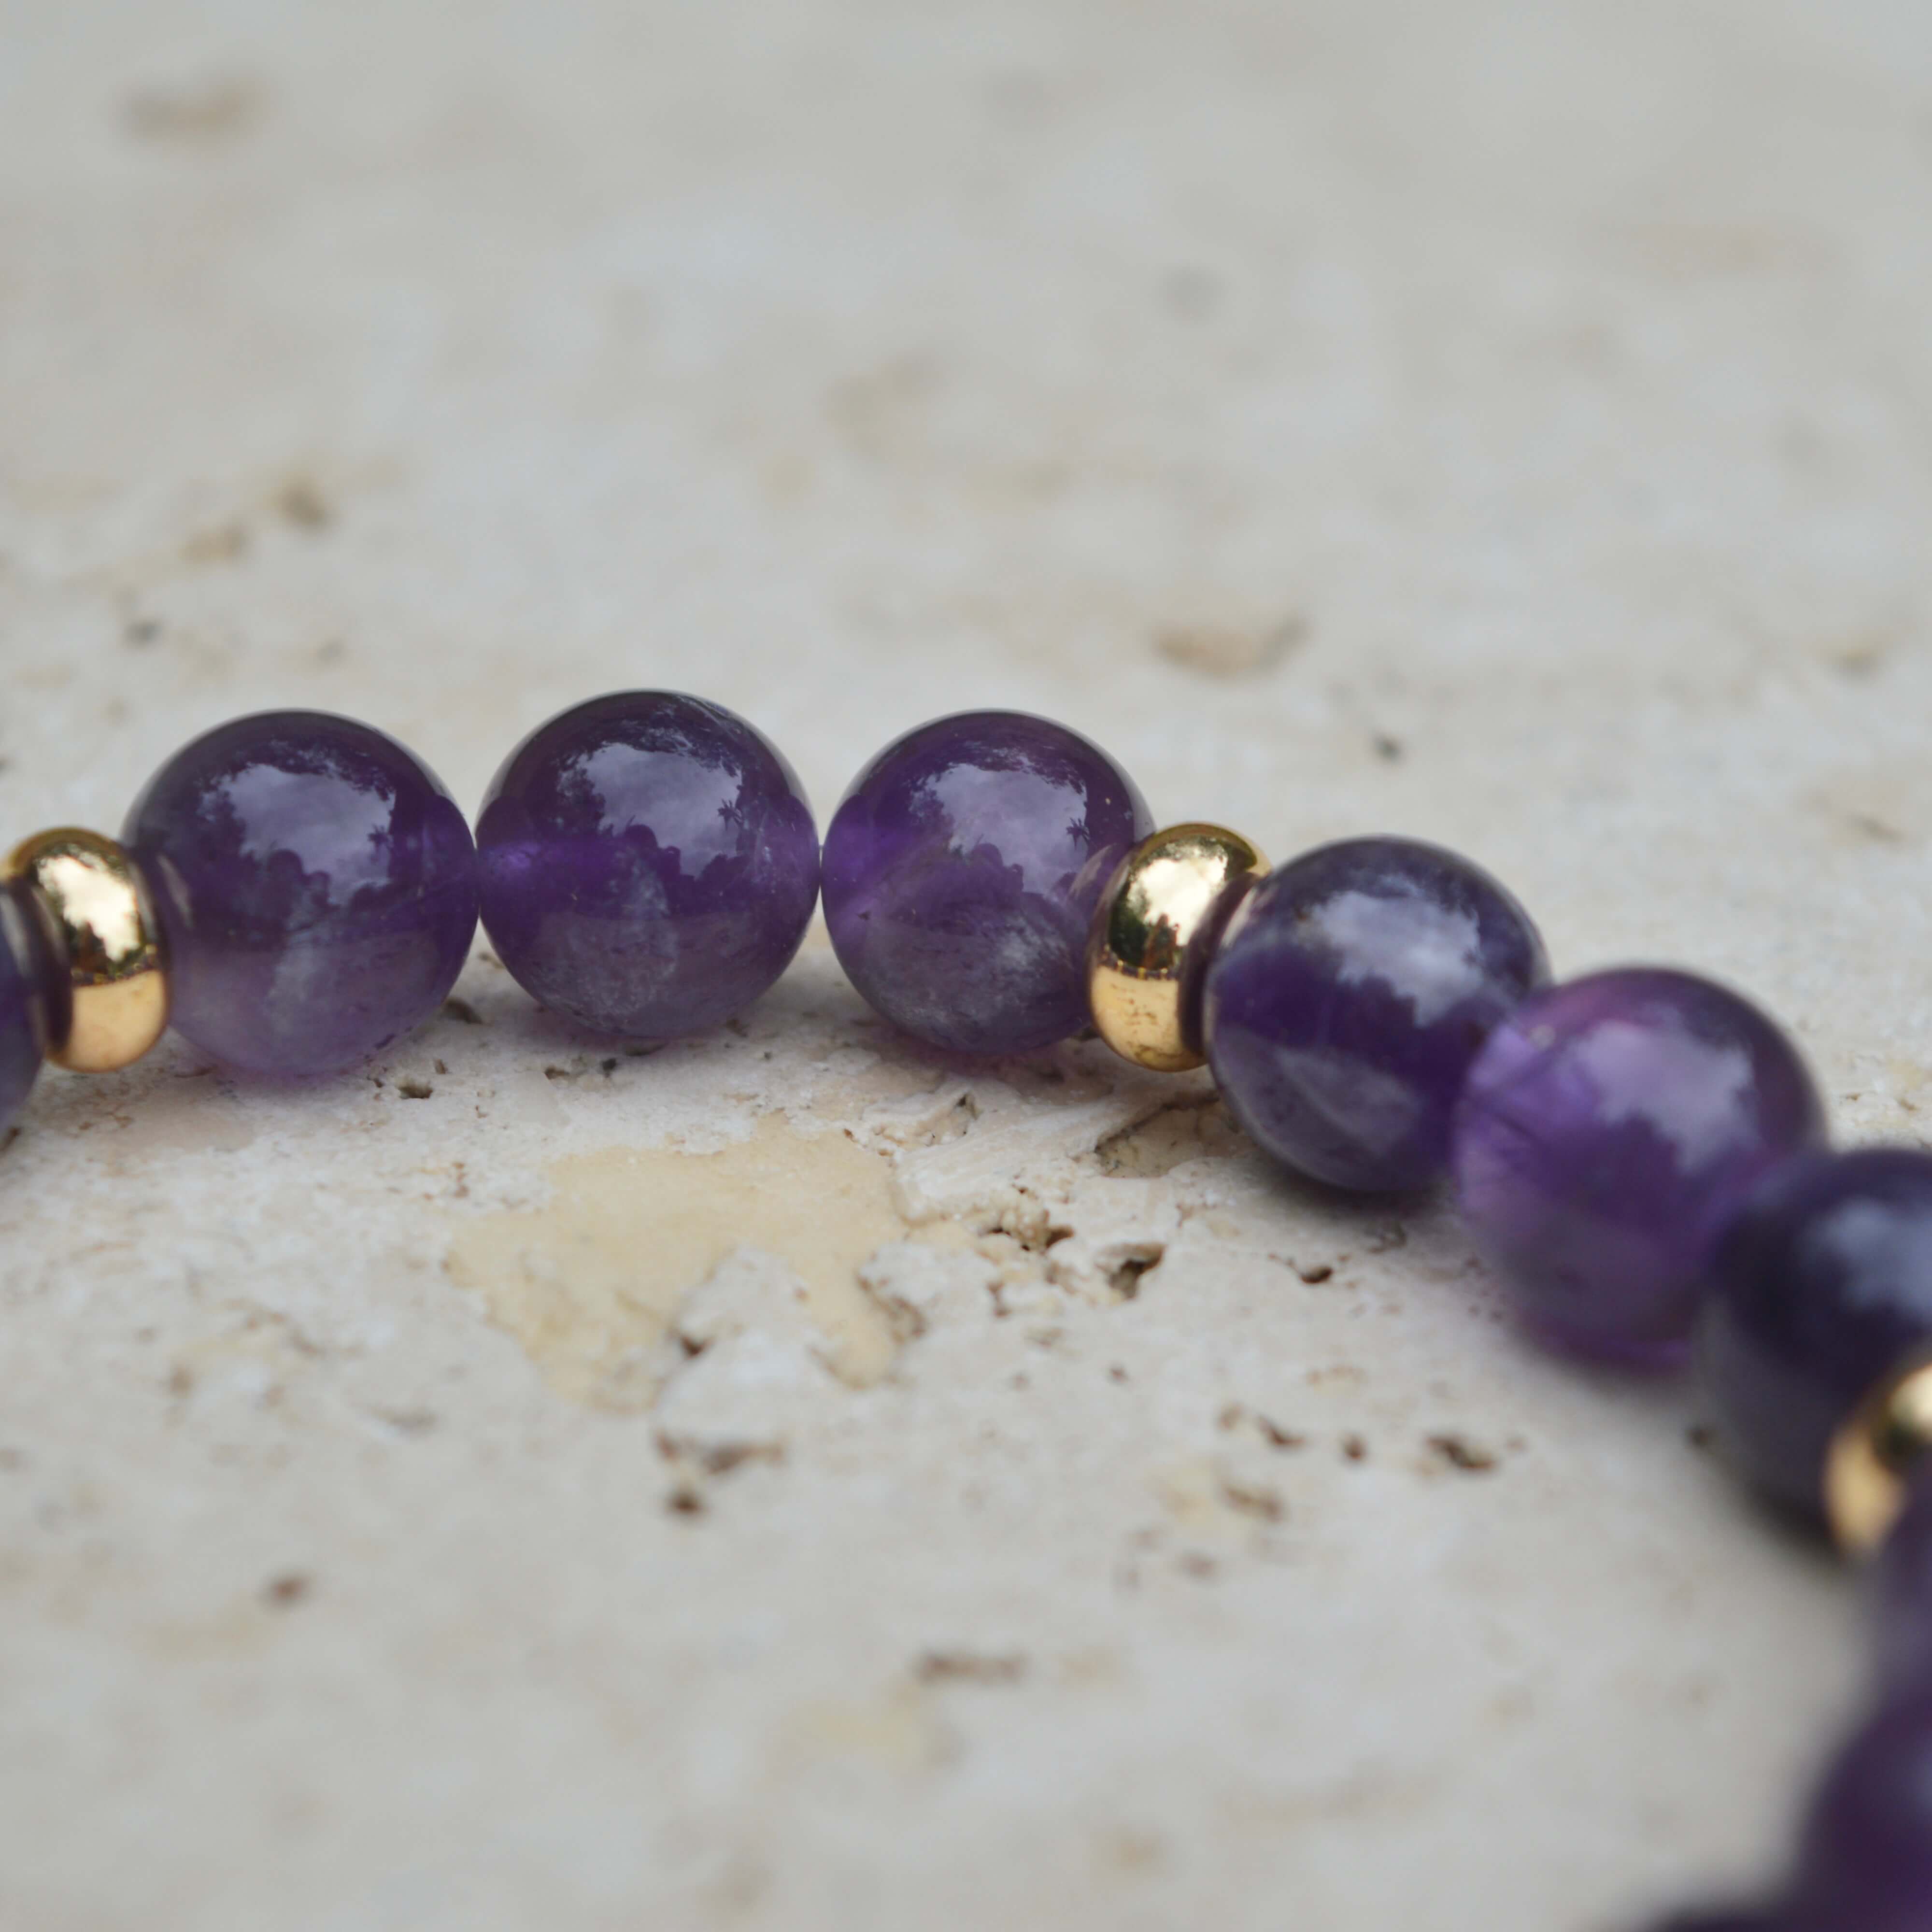 AMETHYST & GOLD BEADED BRACELET - HALCYON COLLECTION - Headless Nation